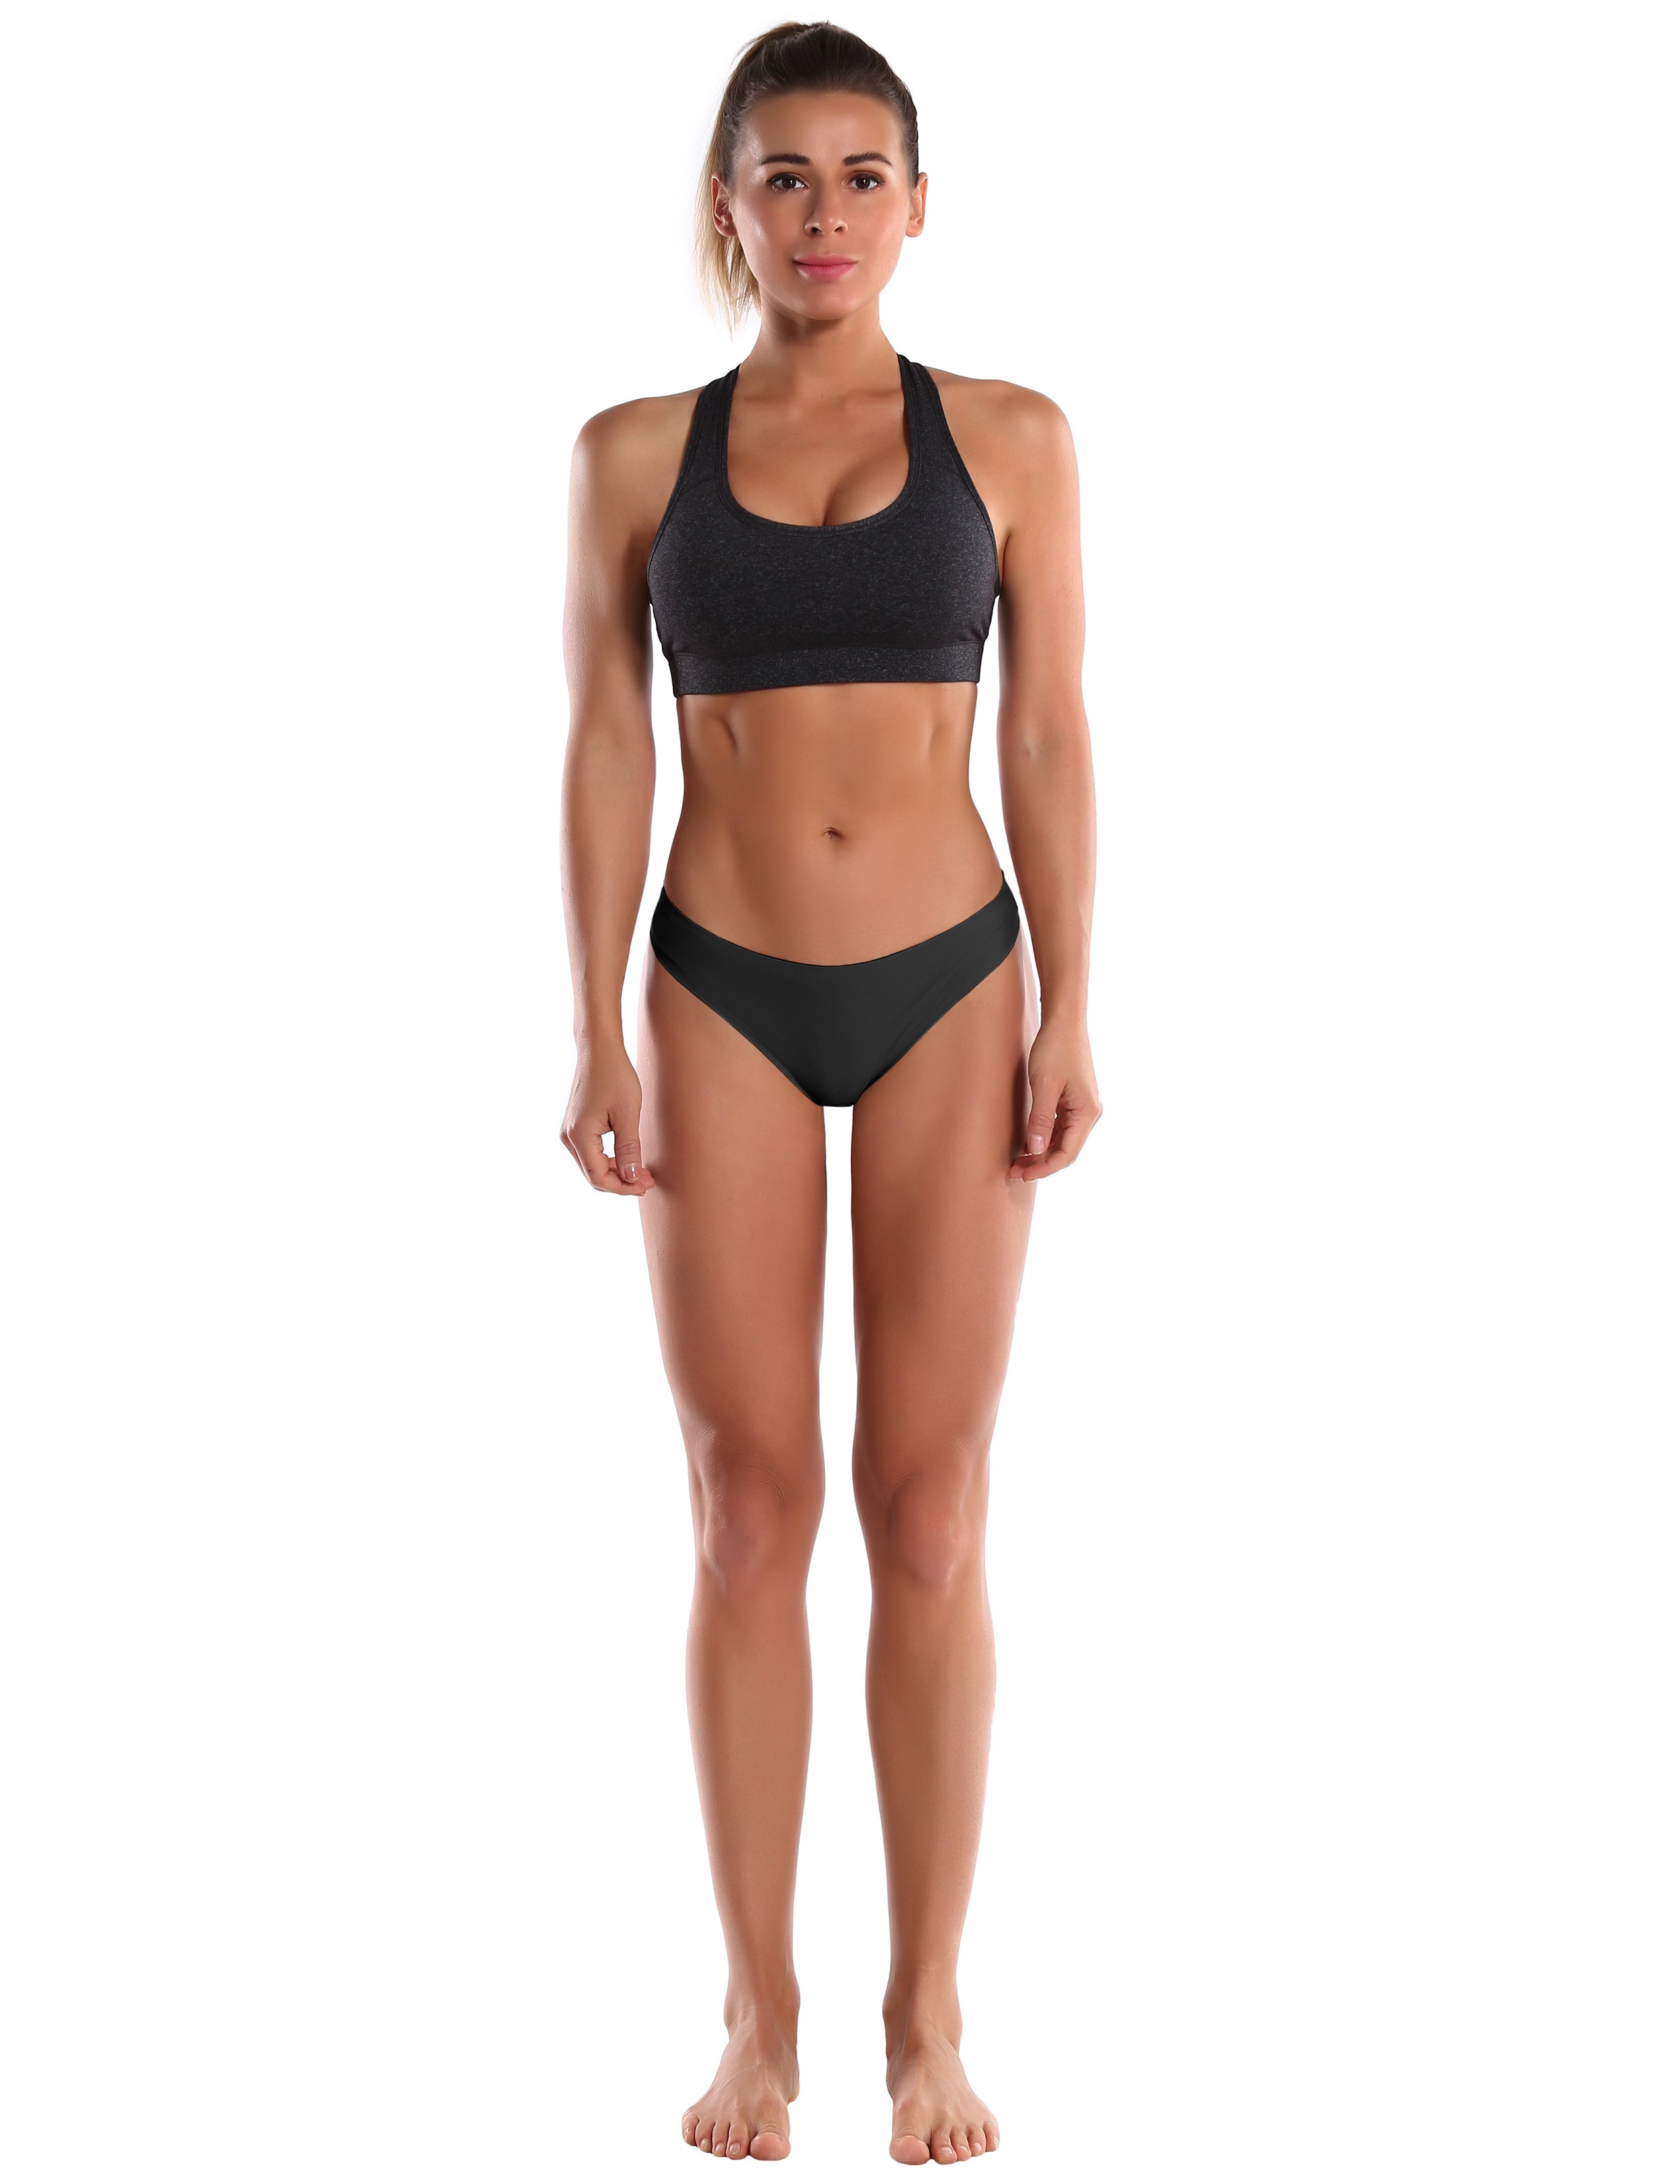 Invisibles Sport Thongs Black Sleek, soft, smooth and totally comfortable: our newest thongs style is here. High elasticity High density Softest-ever fabric Laser cutting Unsealed Comfortable No panty lines Machine wash 95% Nylon, 5% Spandex